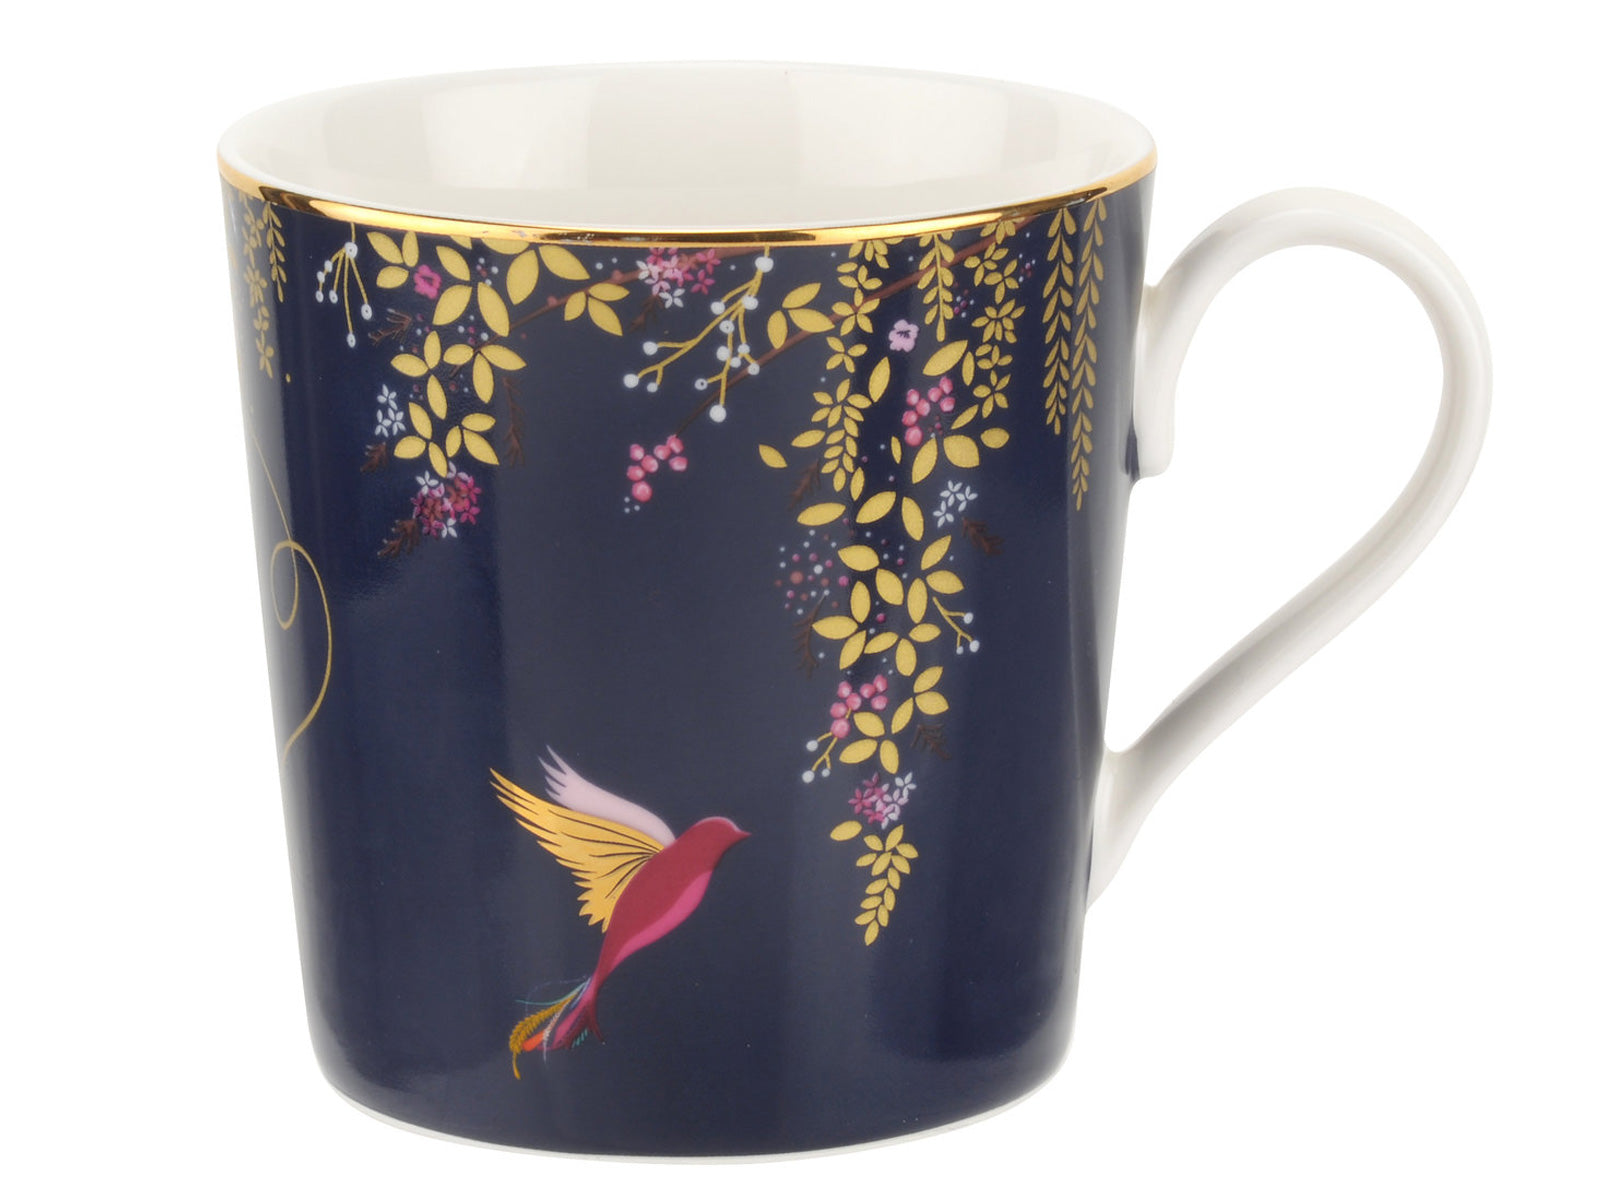 A navy blue porcelain mug with a gold edge and leaves trailing down the side, with a hummingbird ready to feed from the small pink flowers on the trailing foliage.